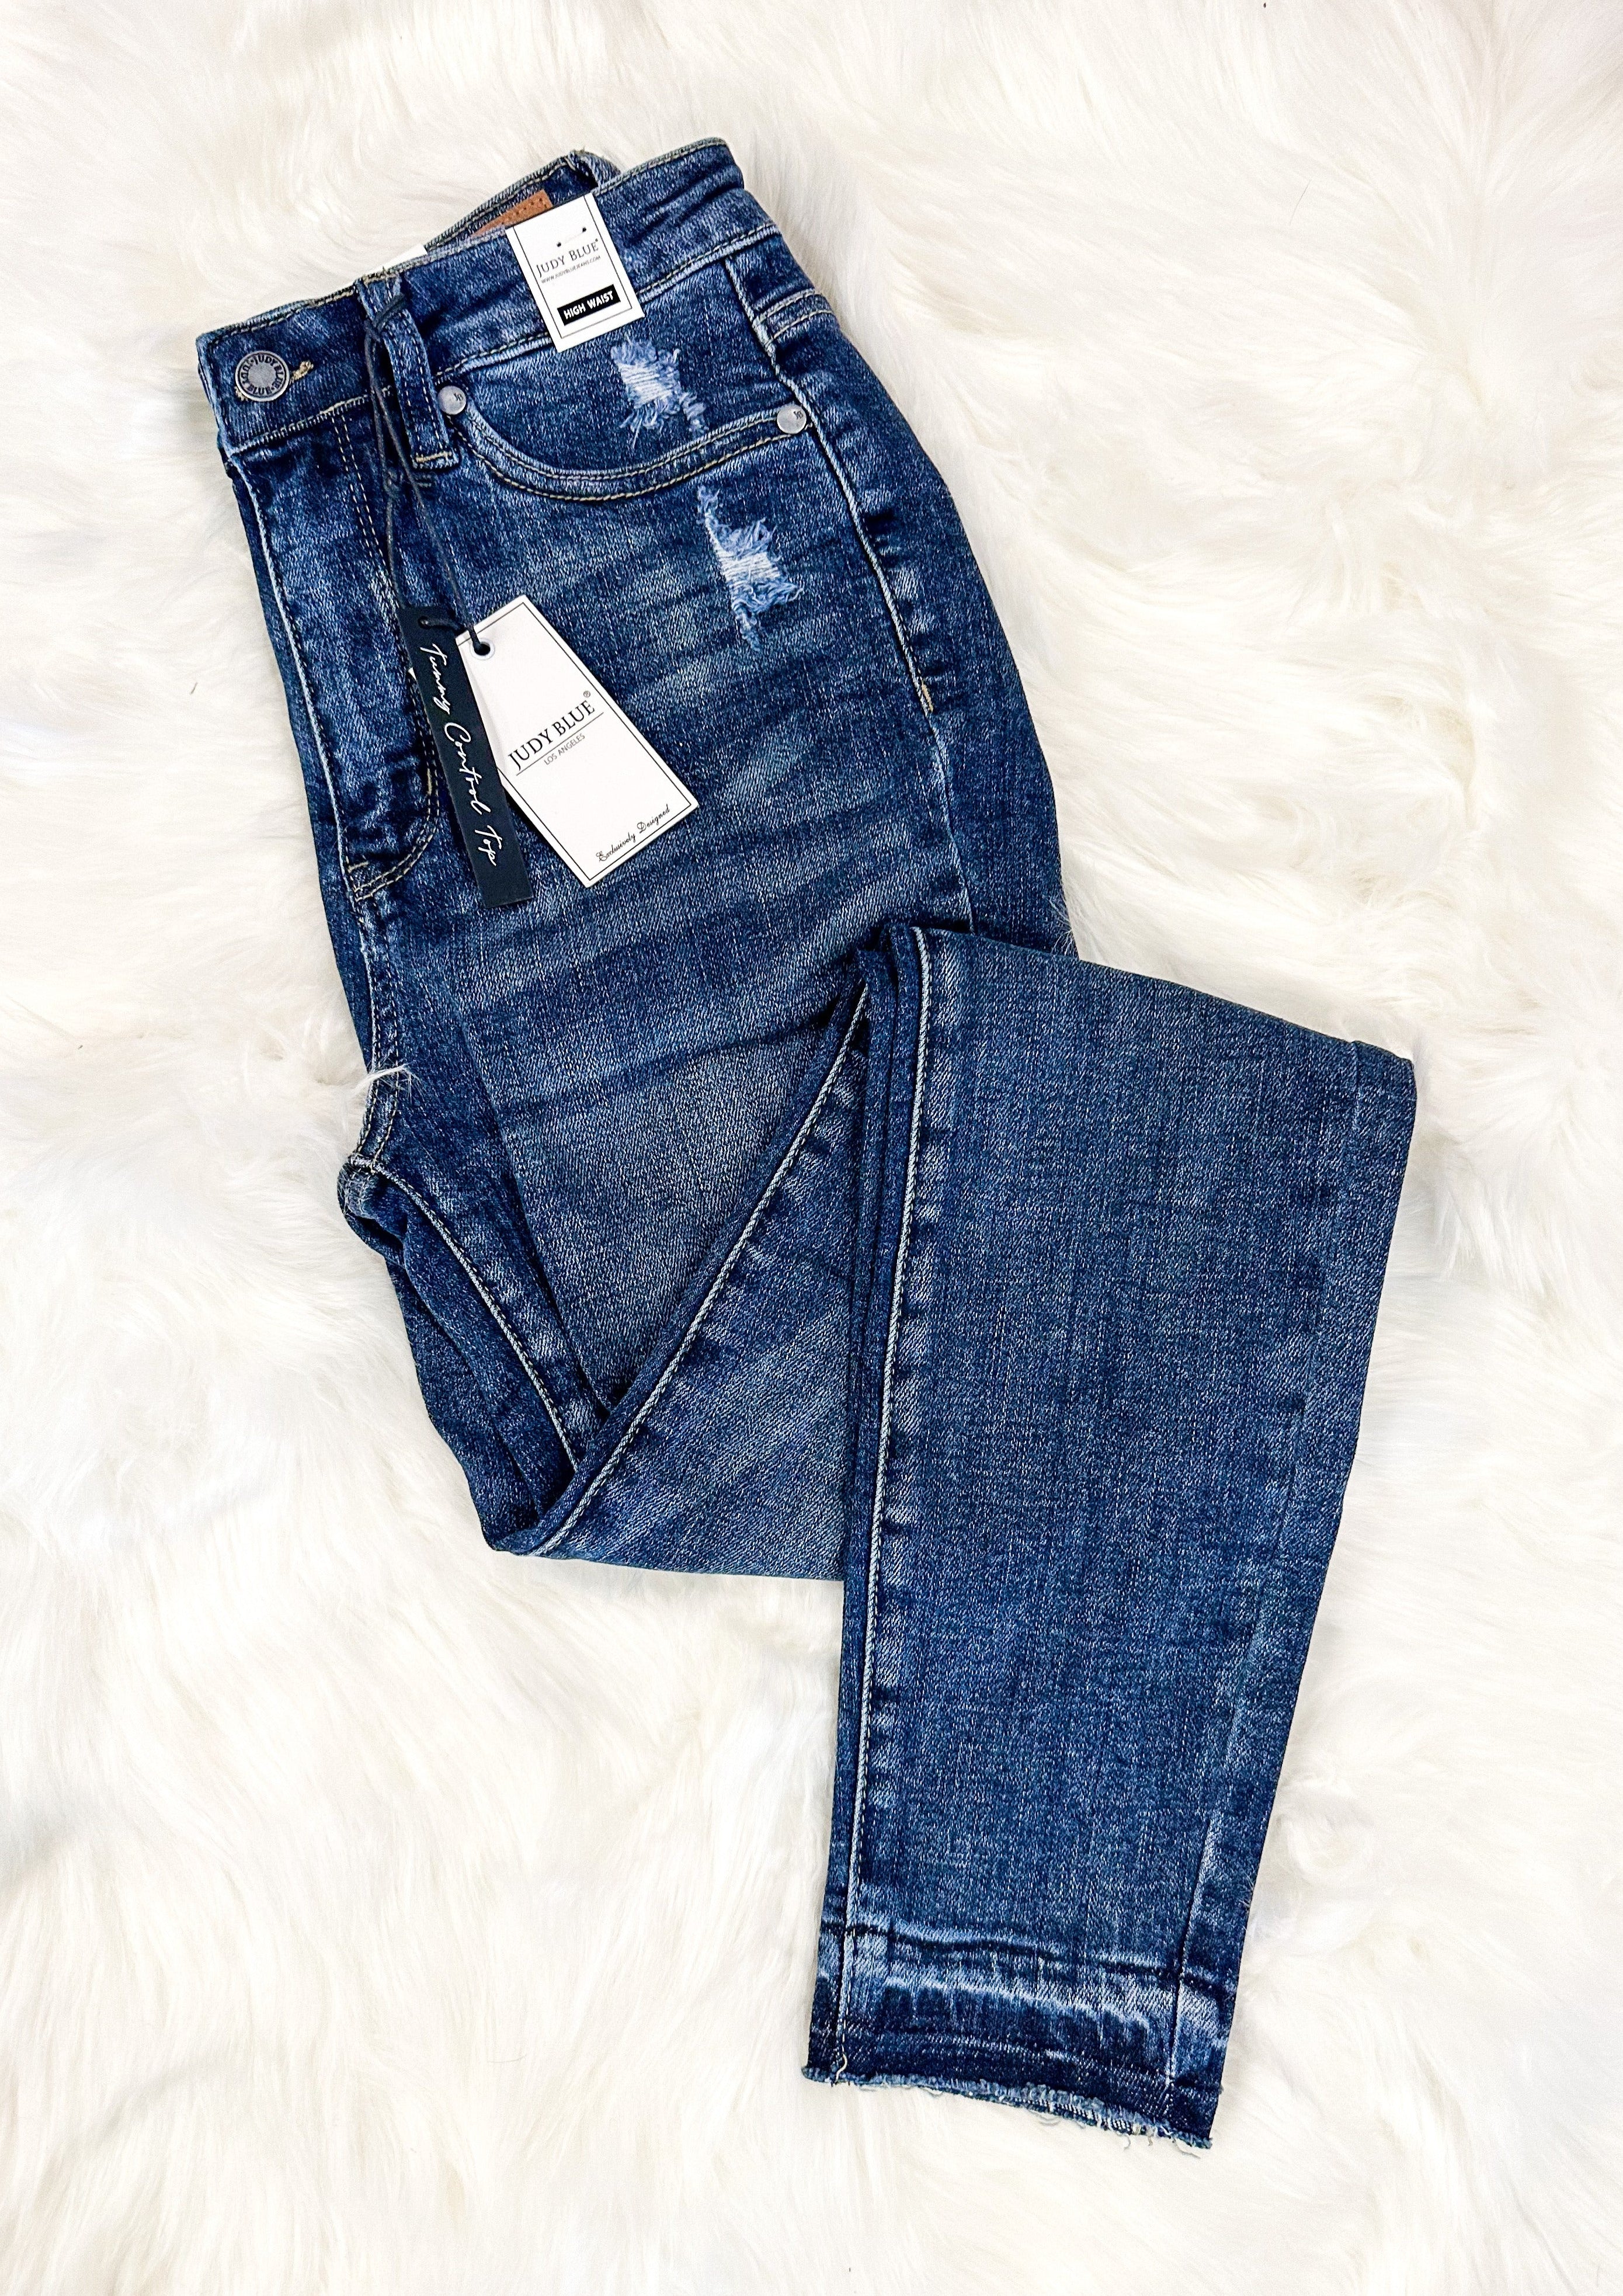 Judy Blue Unfinished Hem Hi Rise Tummy Control Skinny Jean with front and back pockets, zipper and front button closure